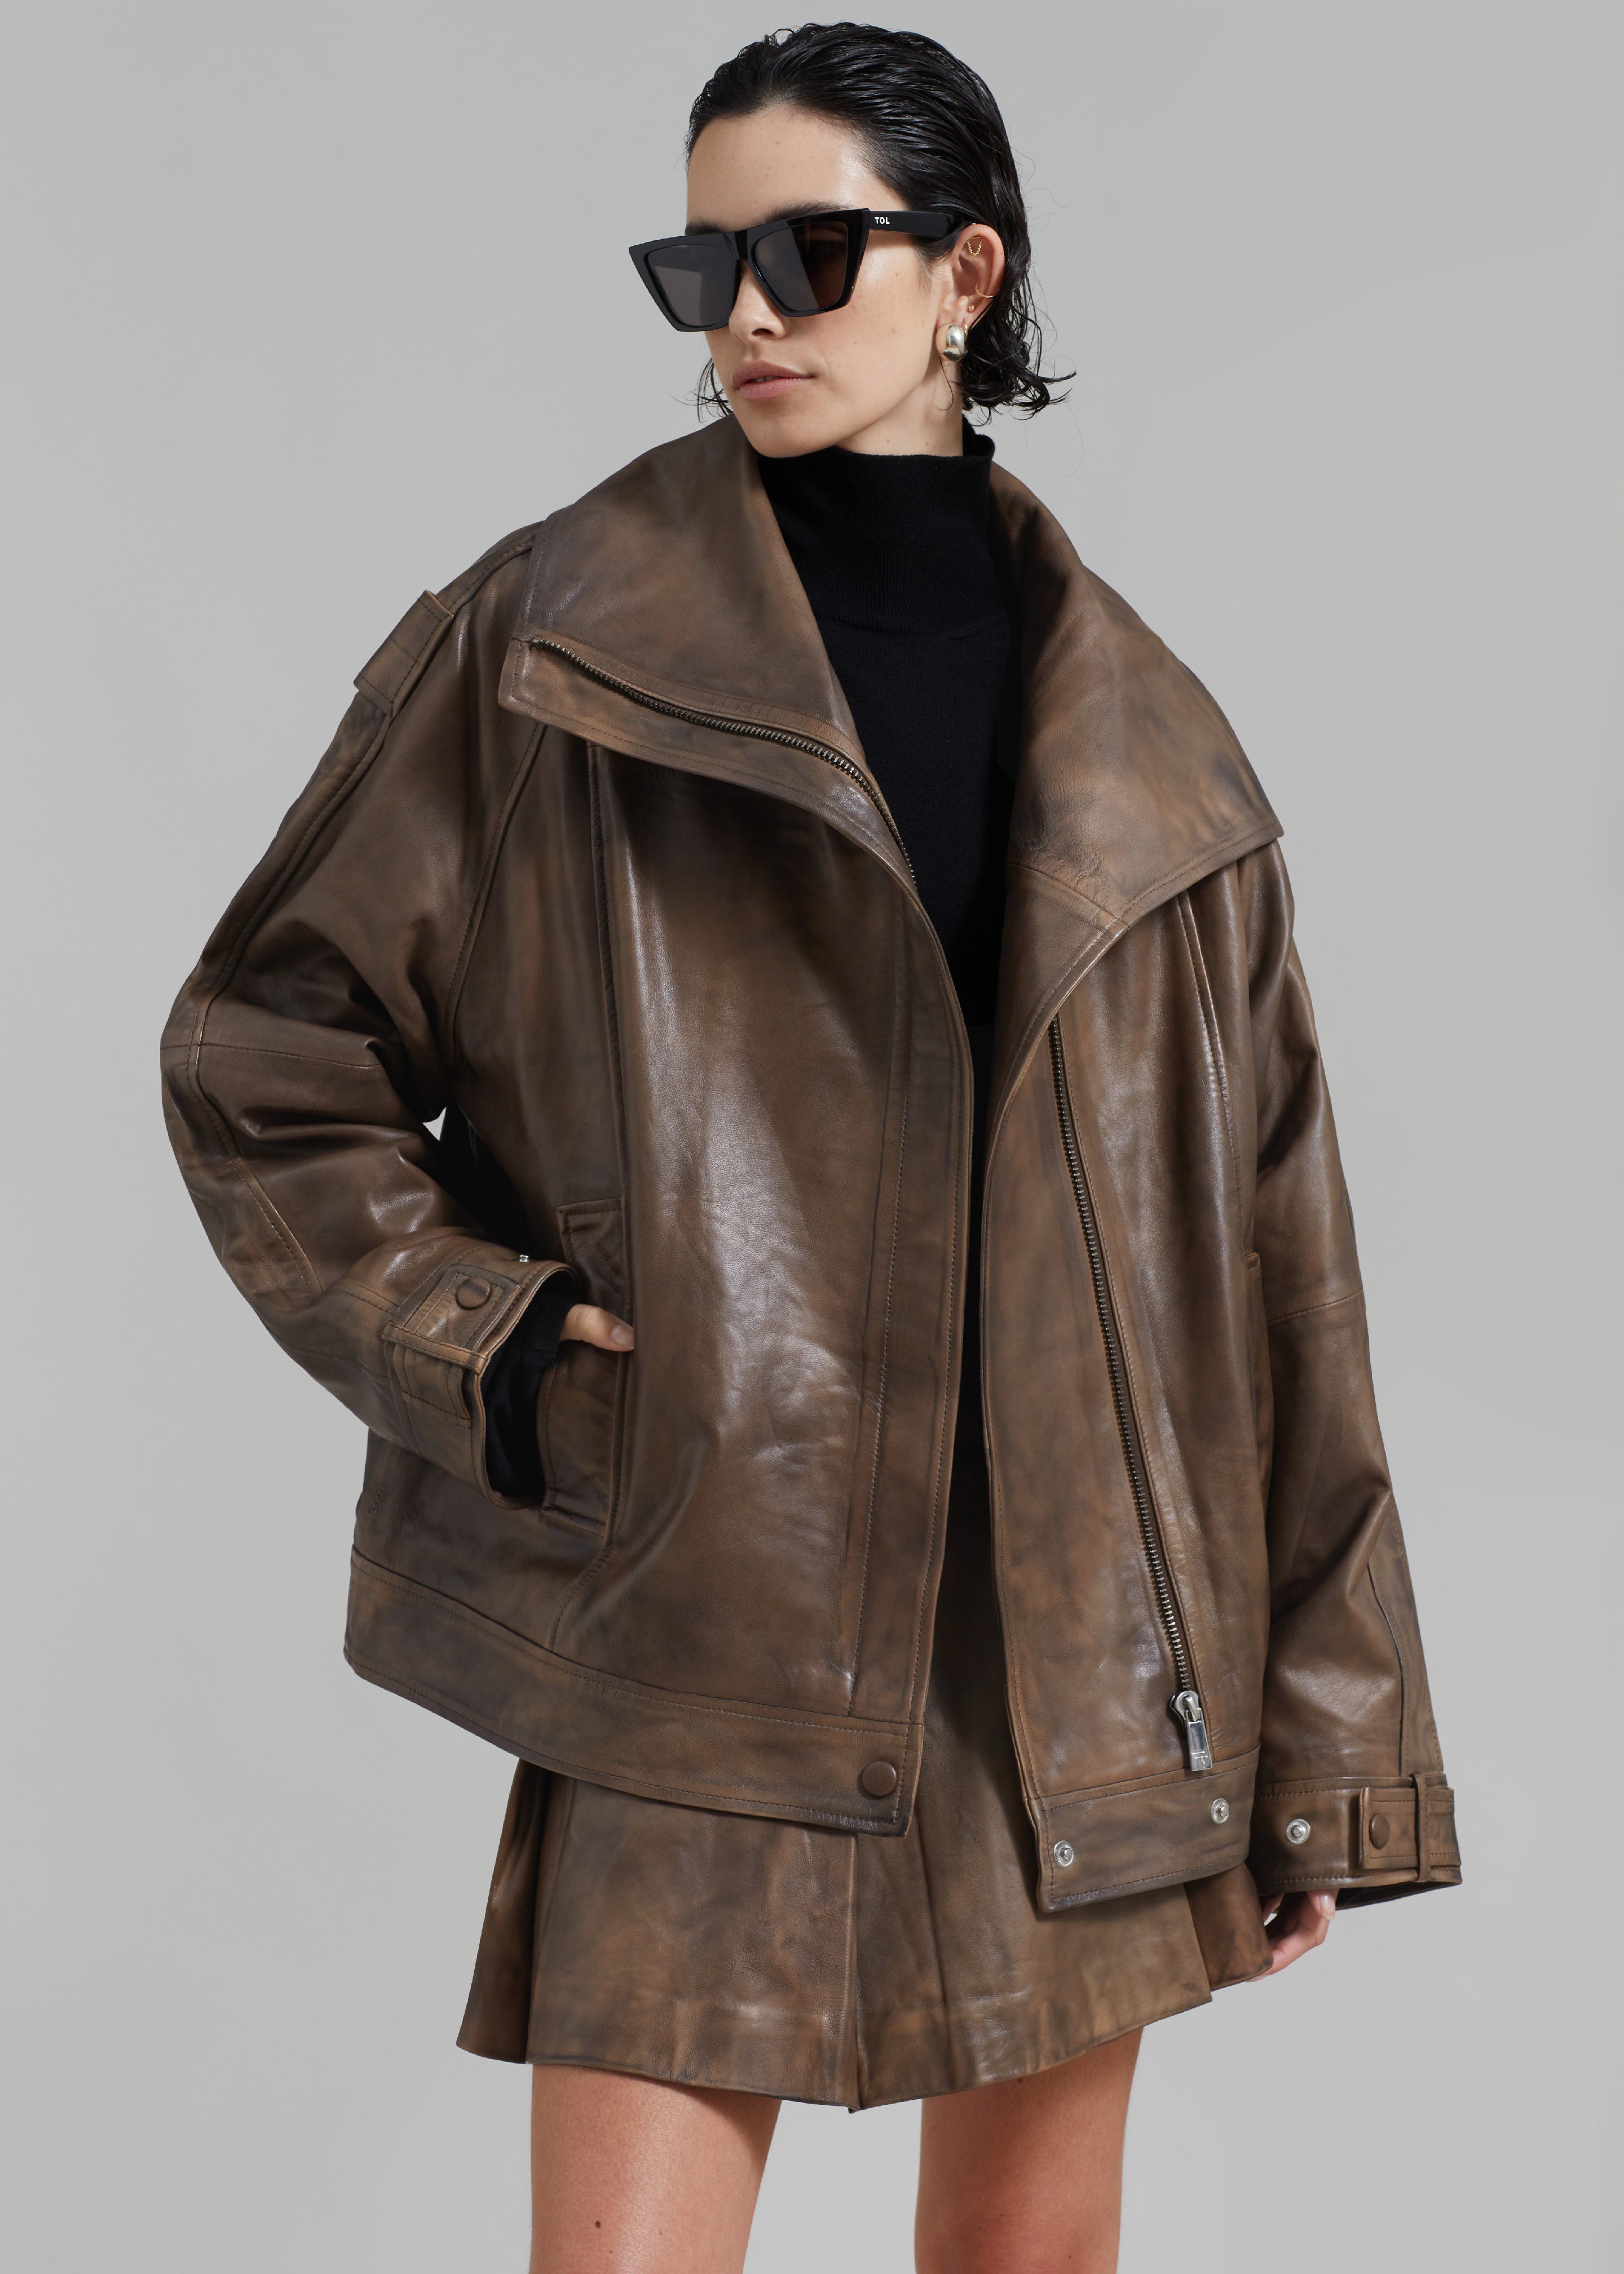 REMAIN Leather Oversized Jacket - Brown Sugar Comb - 1